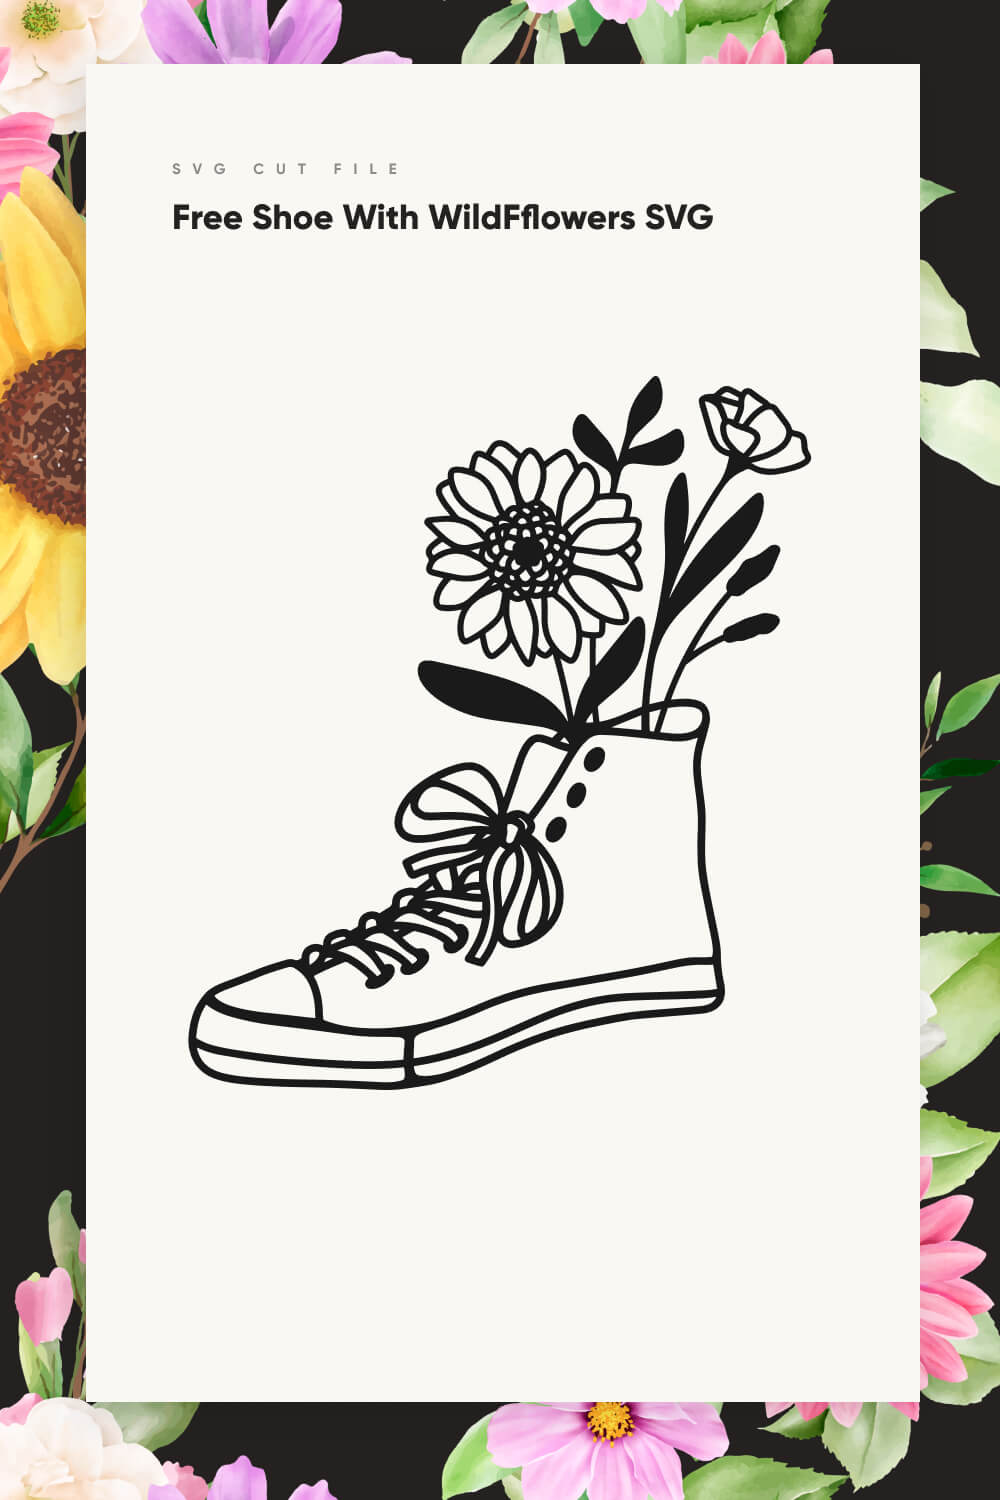 Free Shoe with Wildflowers SVG pinterest.